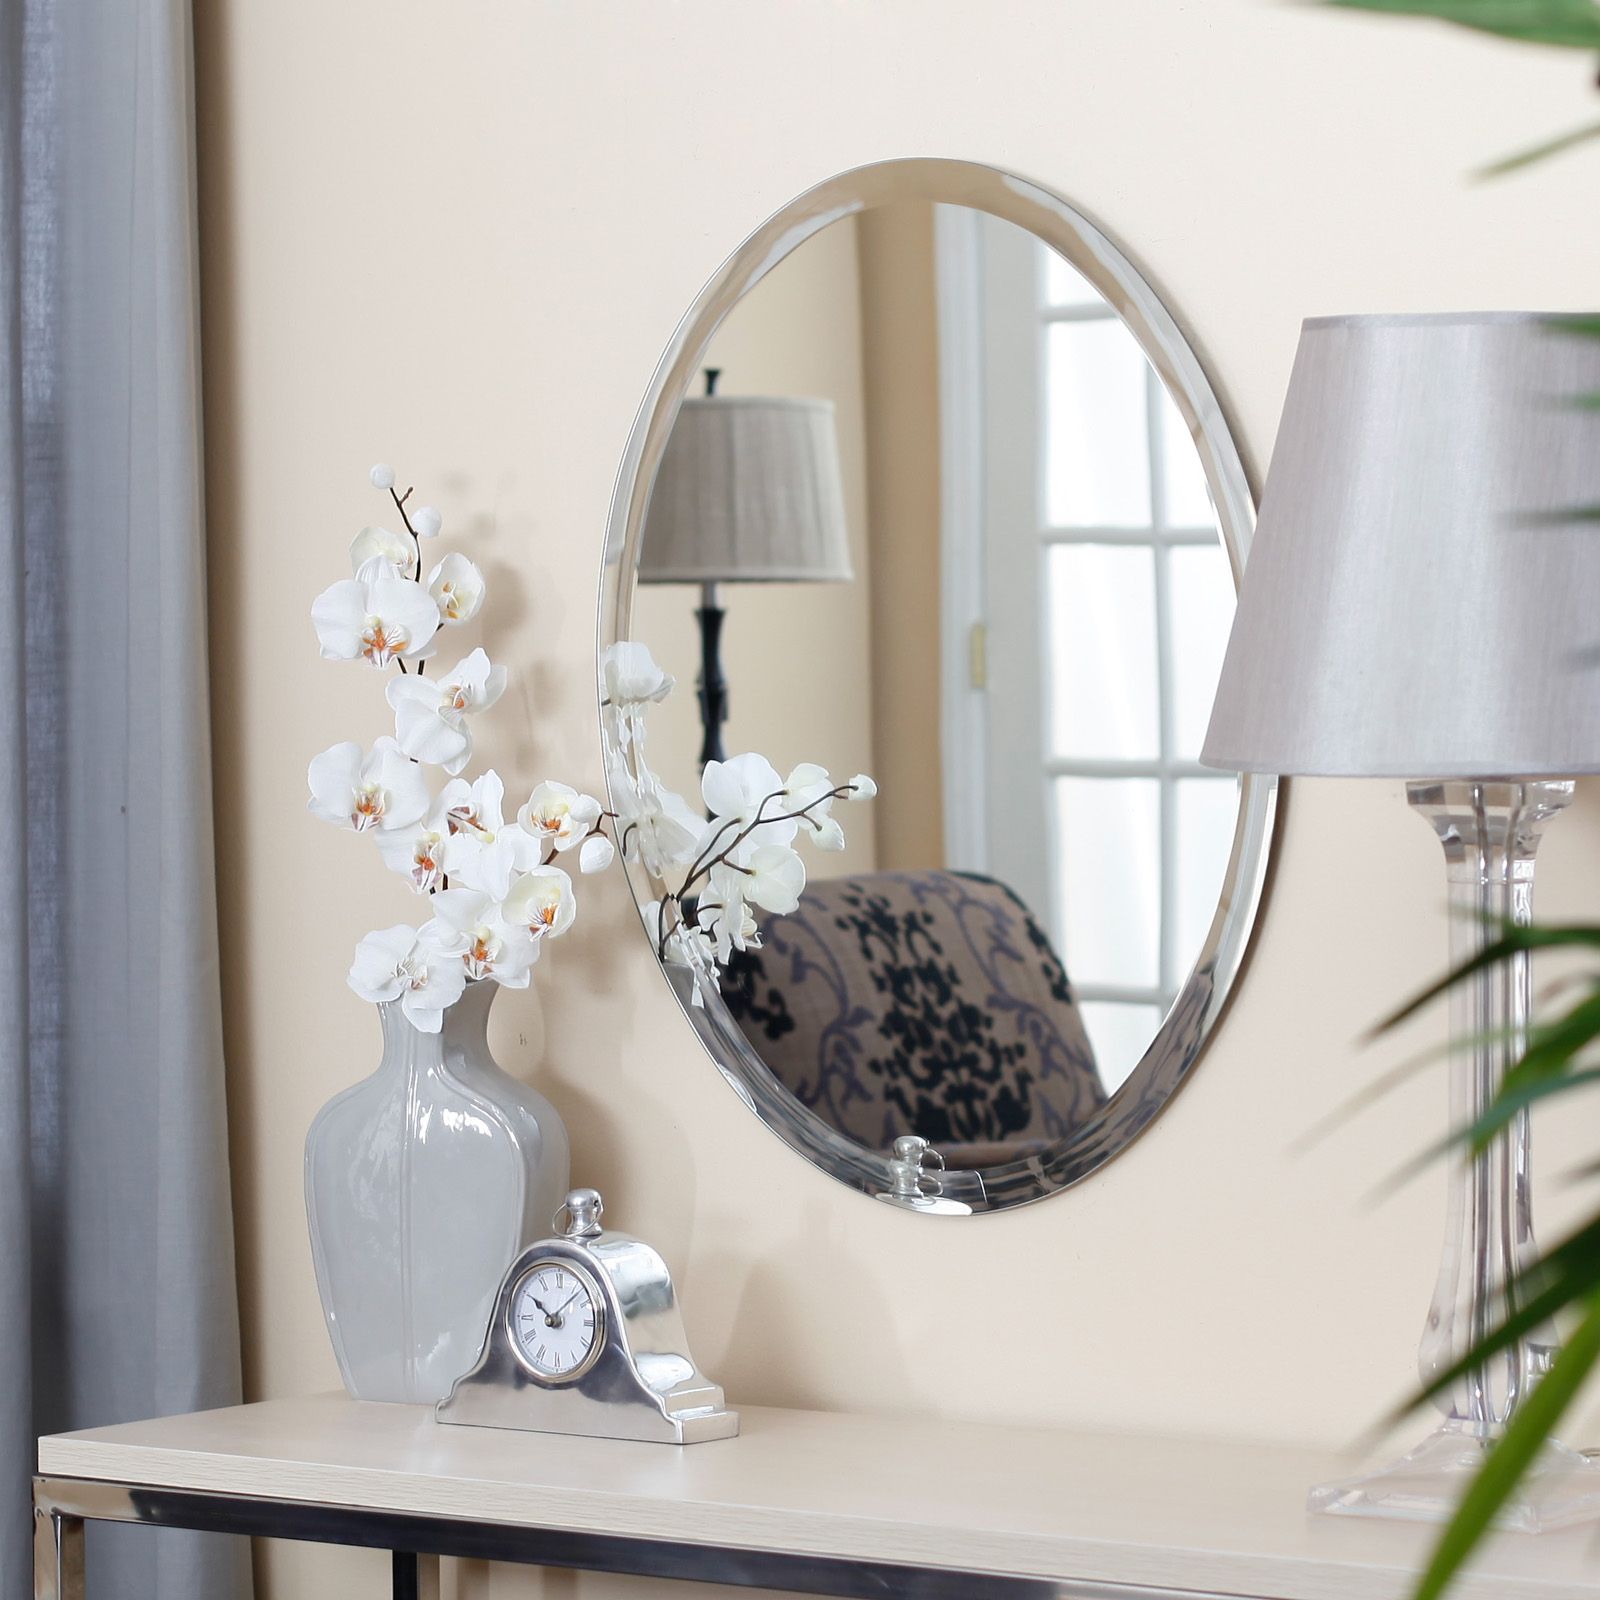 Uttermost Frameless Oval Beveled Vanity Mirror – Mirrors At Hayneedle Throughout Thornbury Oval Bevel Frameless Wall Mirrors (View 10 of 15)